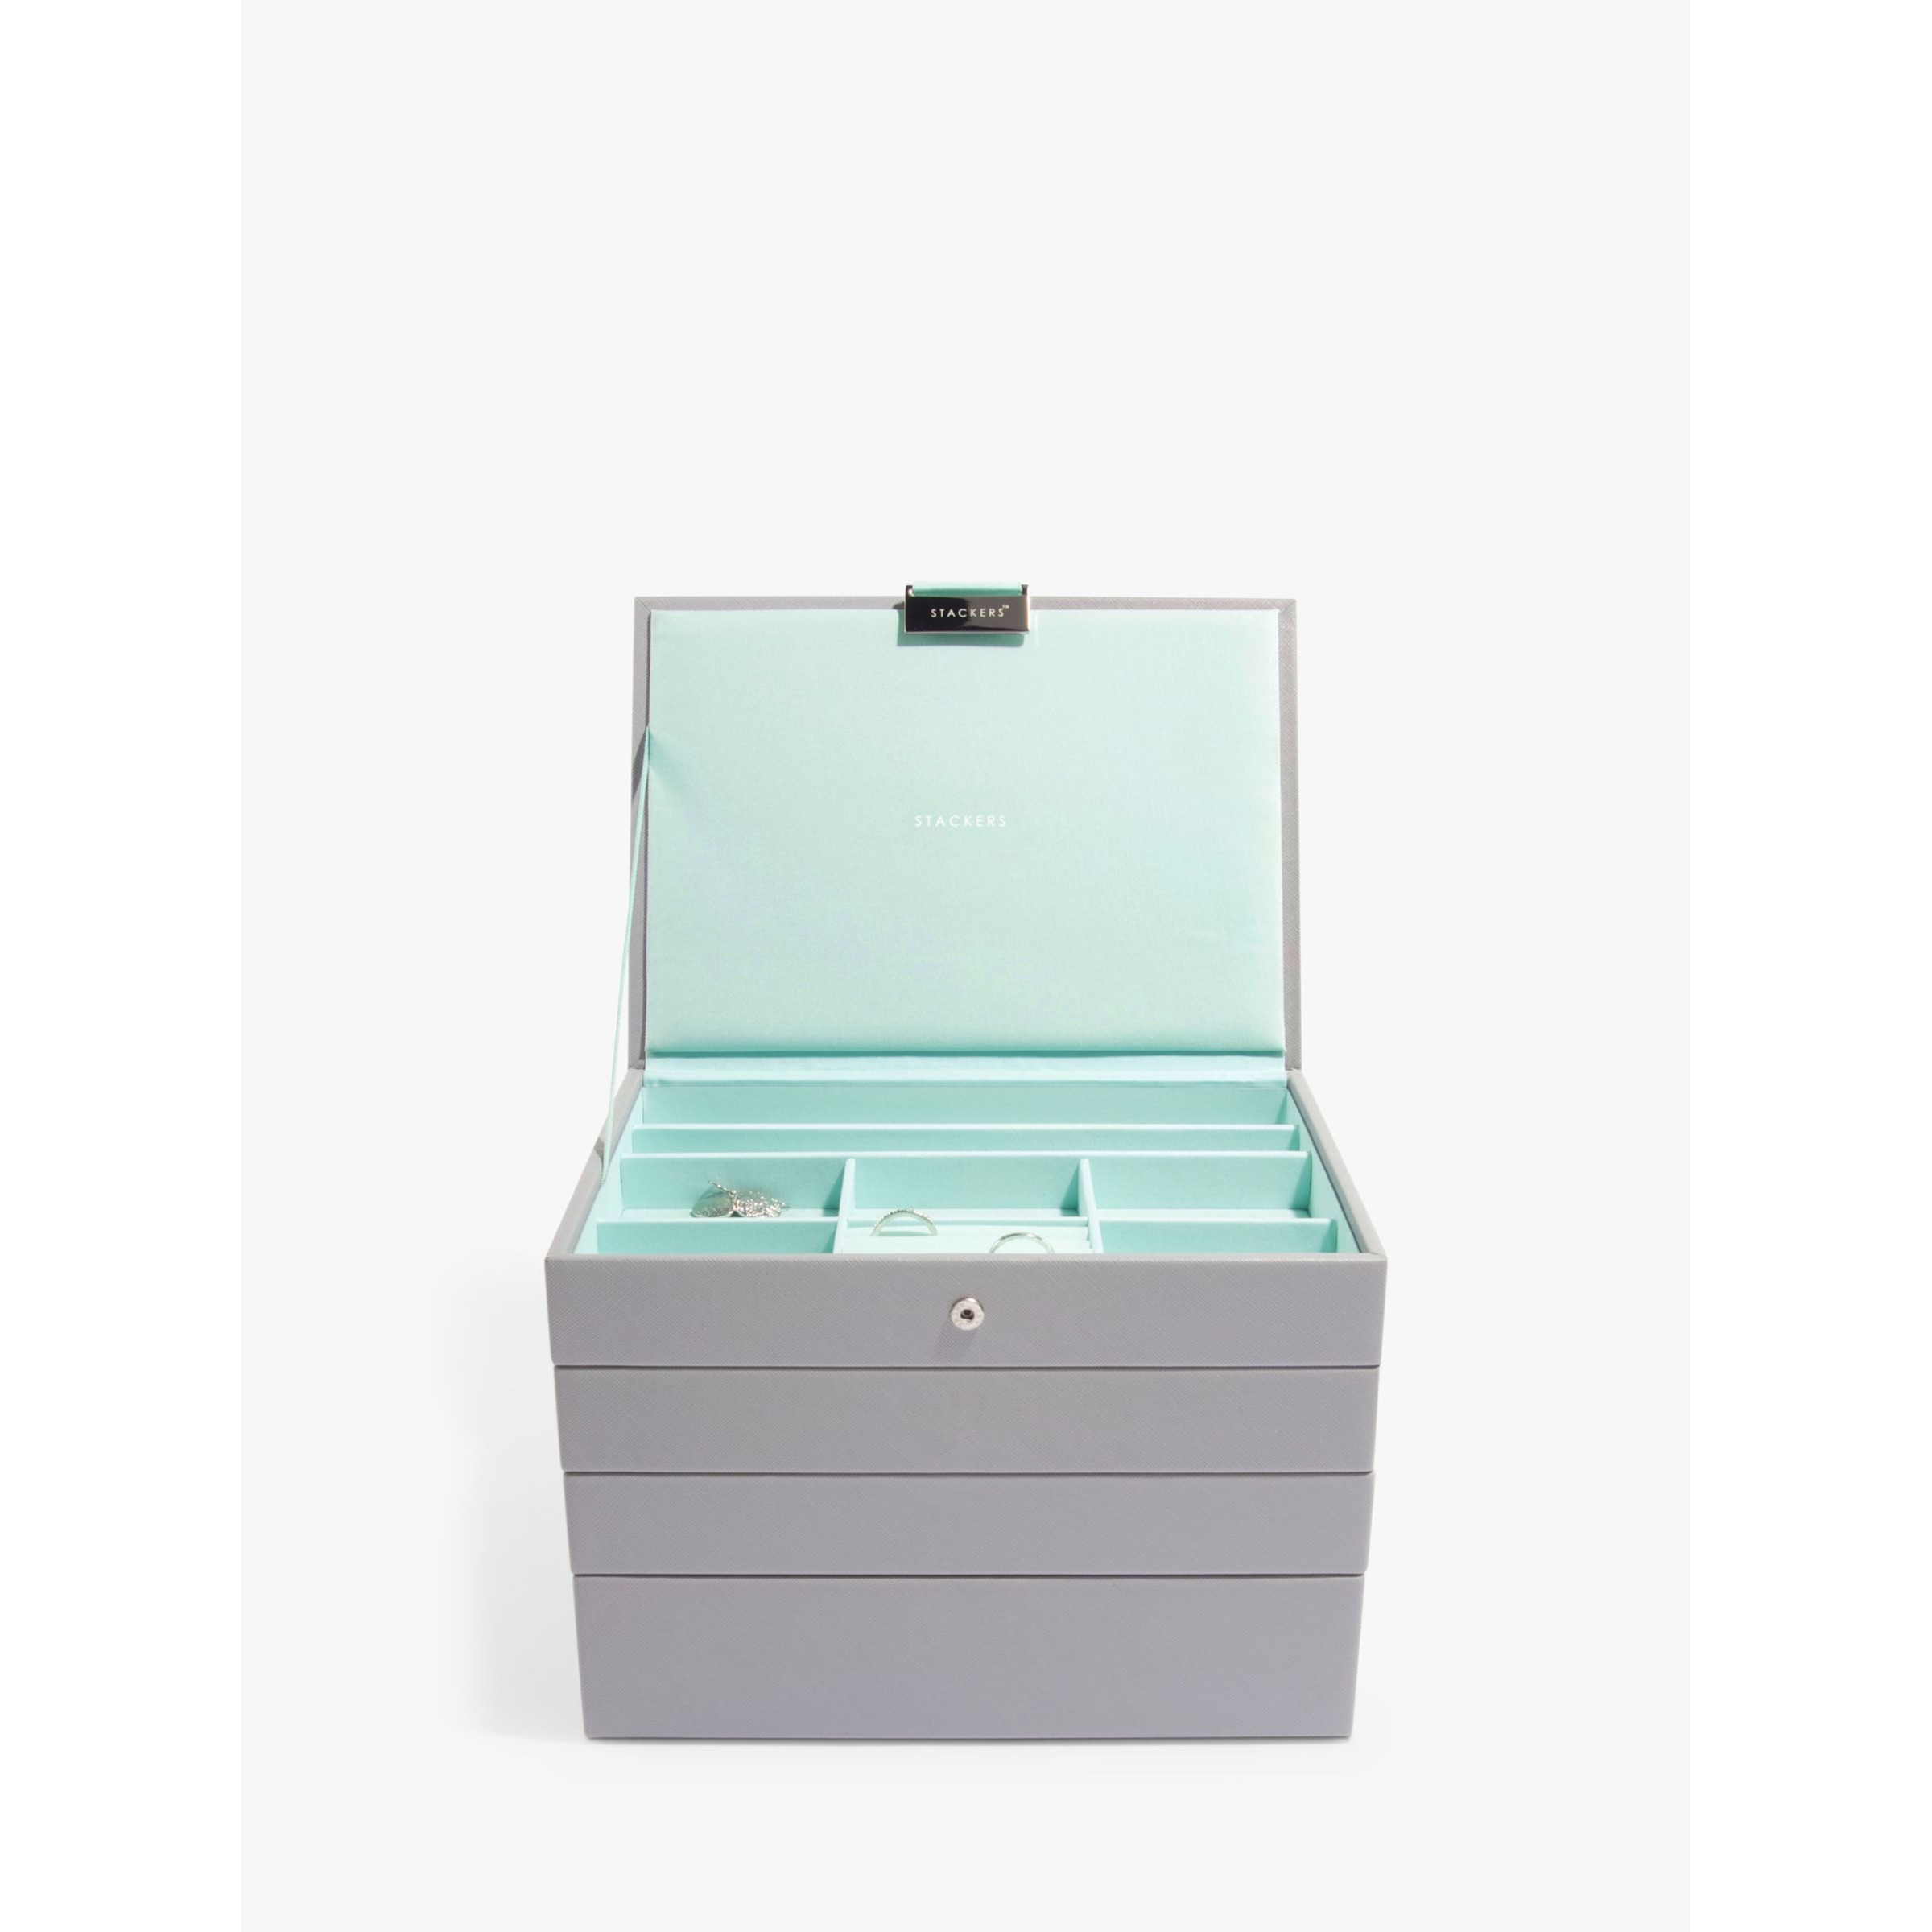 Stackers Classic 4 Layer Jewellery Box - image 1